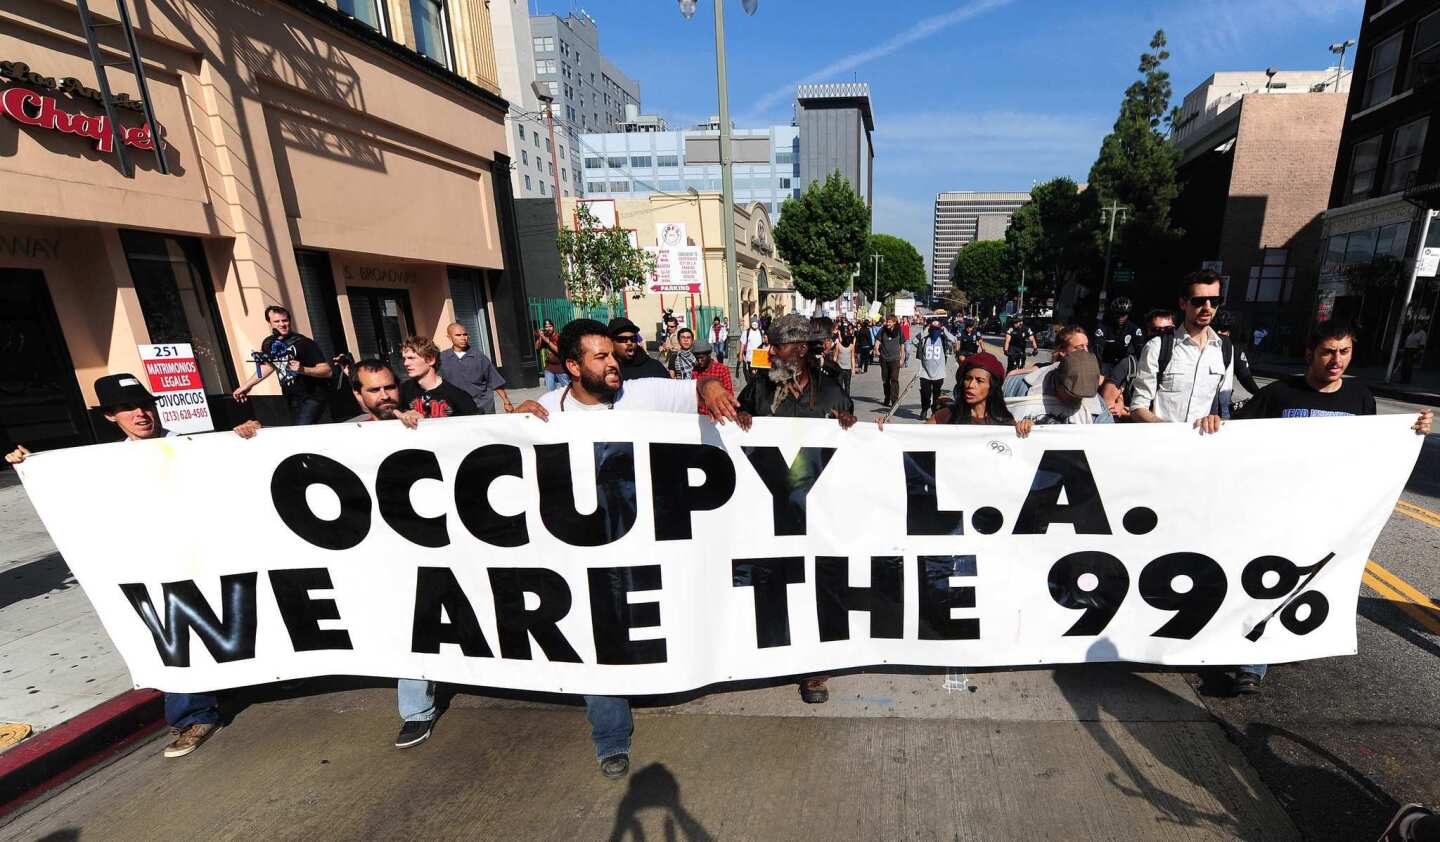 Occupy protesters: 'We are the 99%'